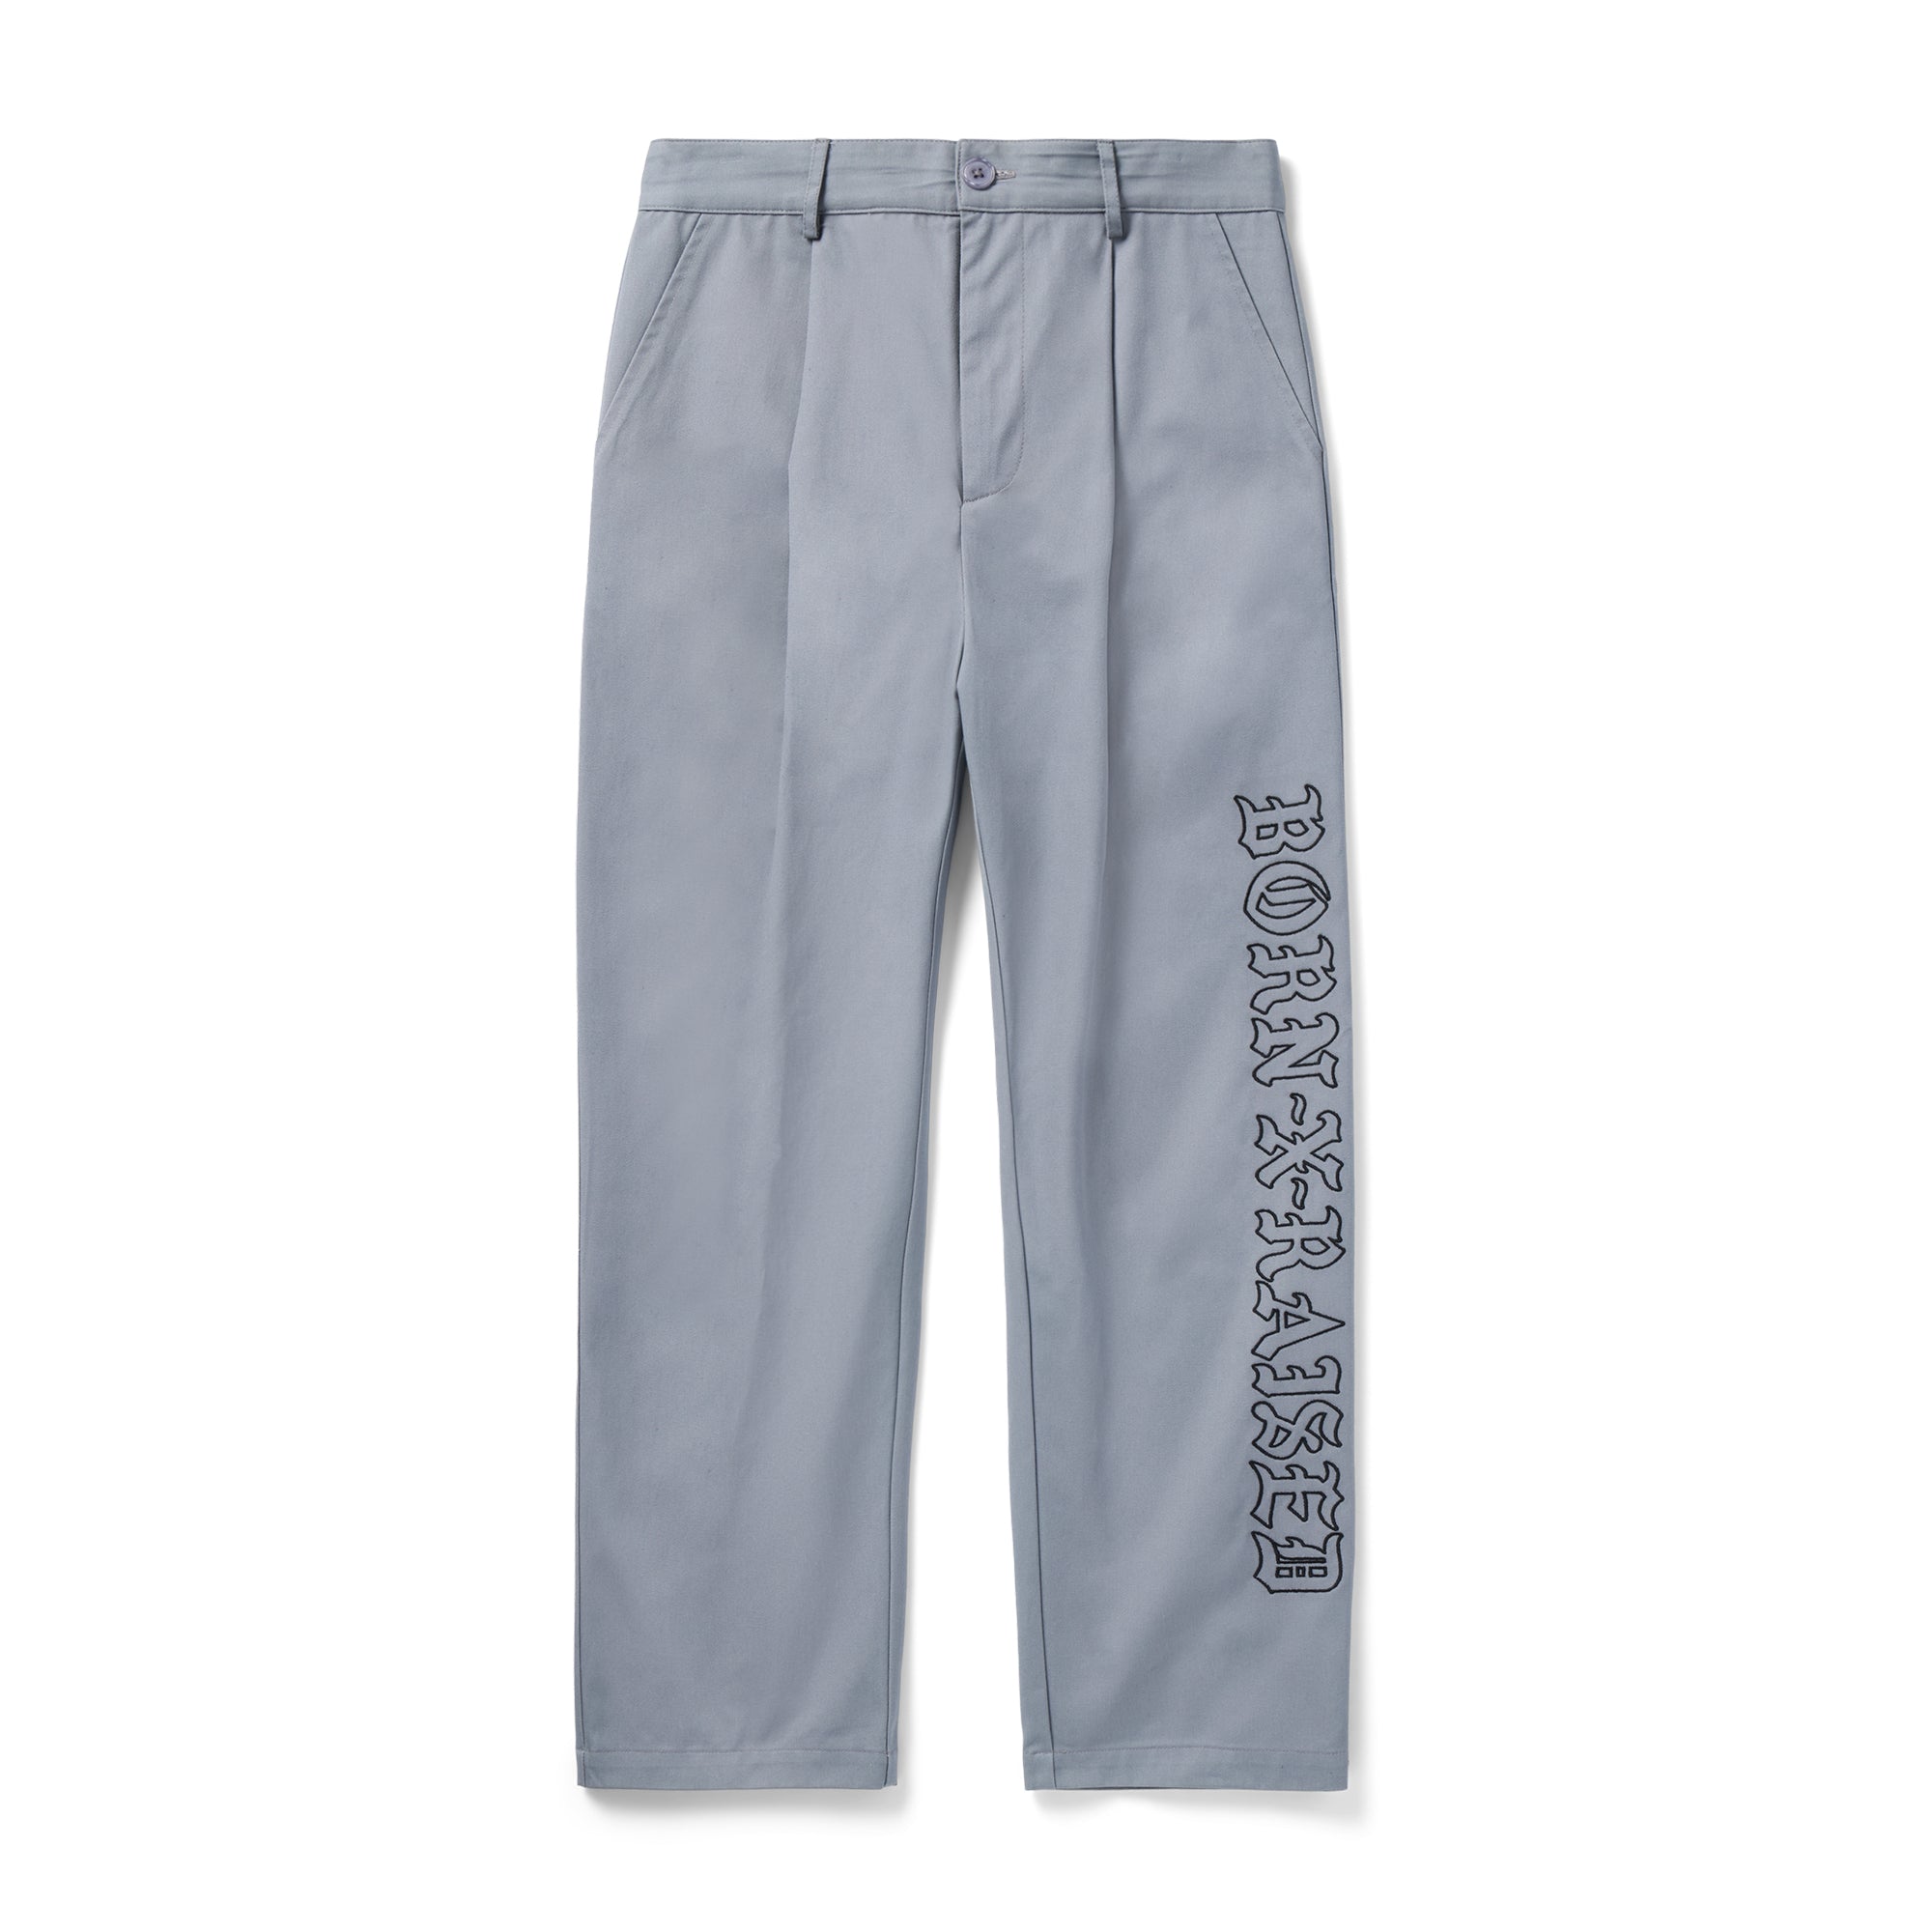 BXR EMBROIDERED WORK PANTS: GREY/BLACK